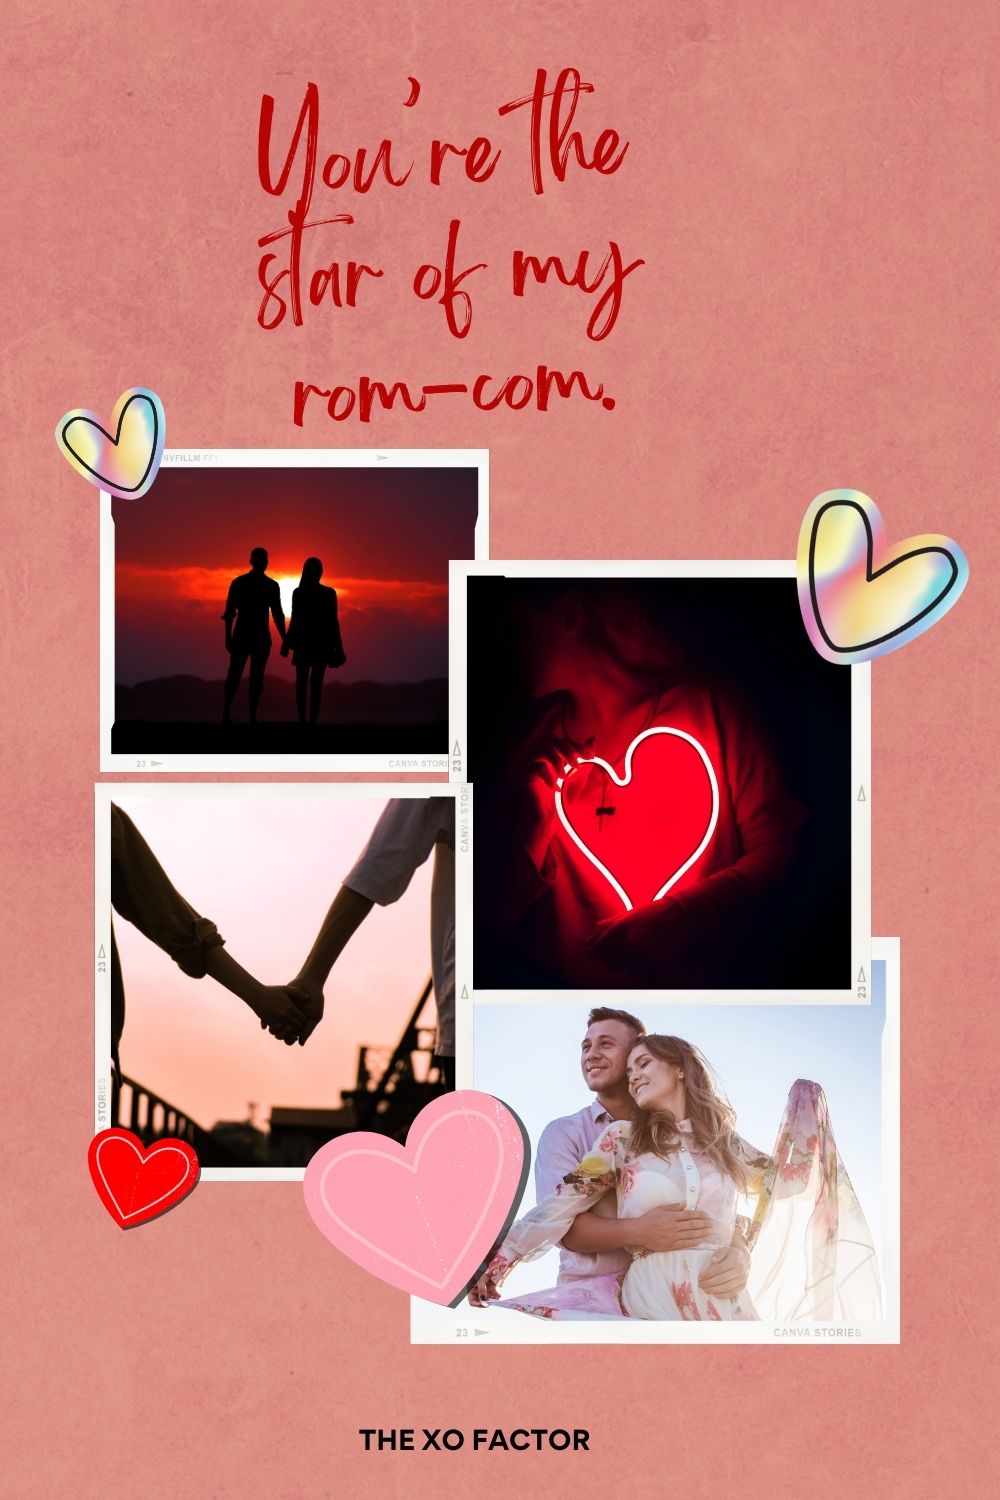 You’re the star of my rom-com.